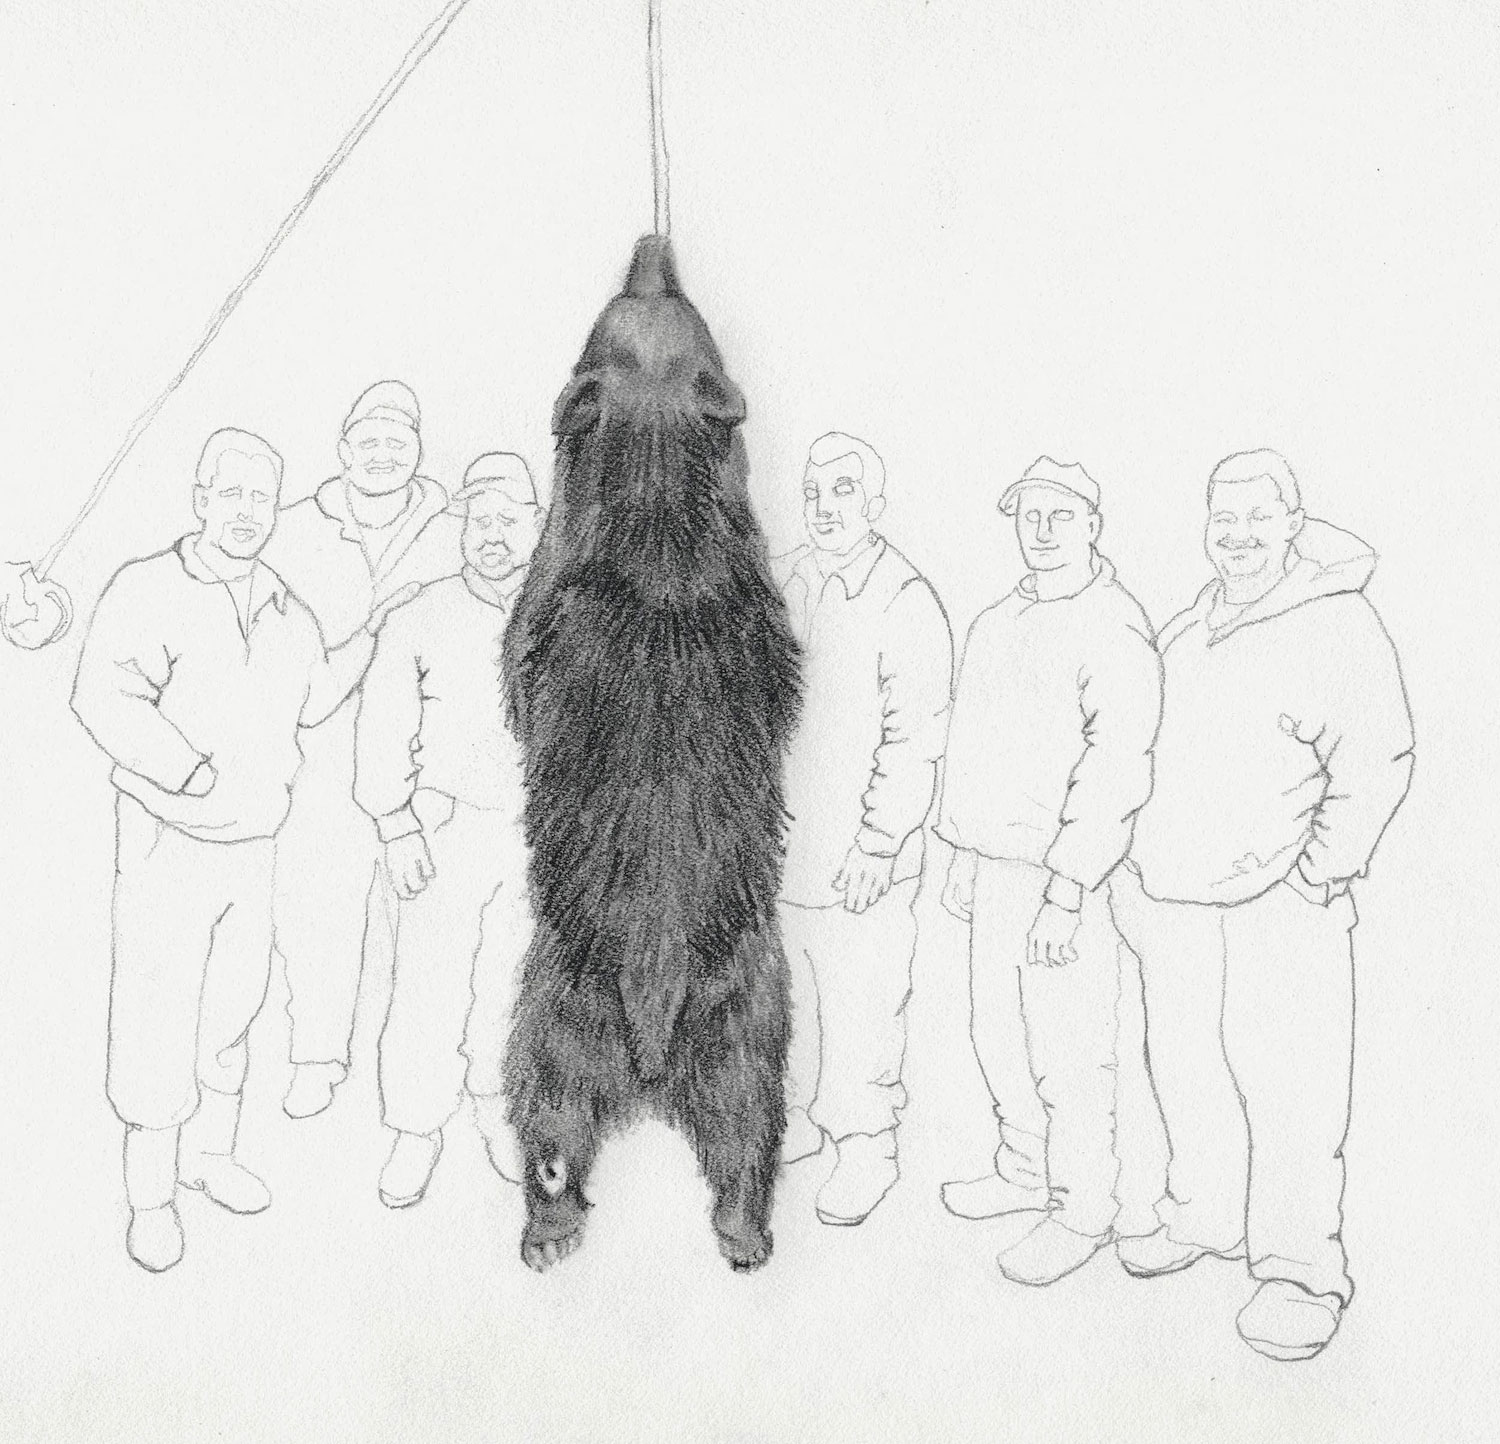 Jackie Skrzynski, Hung Bear with Heel Tag, 2014. Pencil, 9 x 8.5 in.